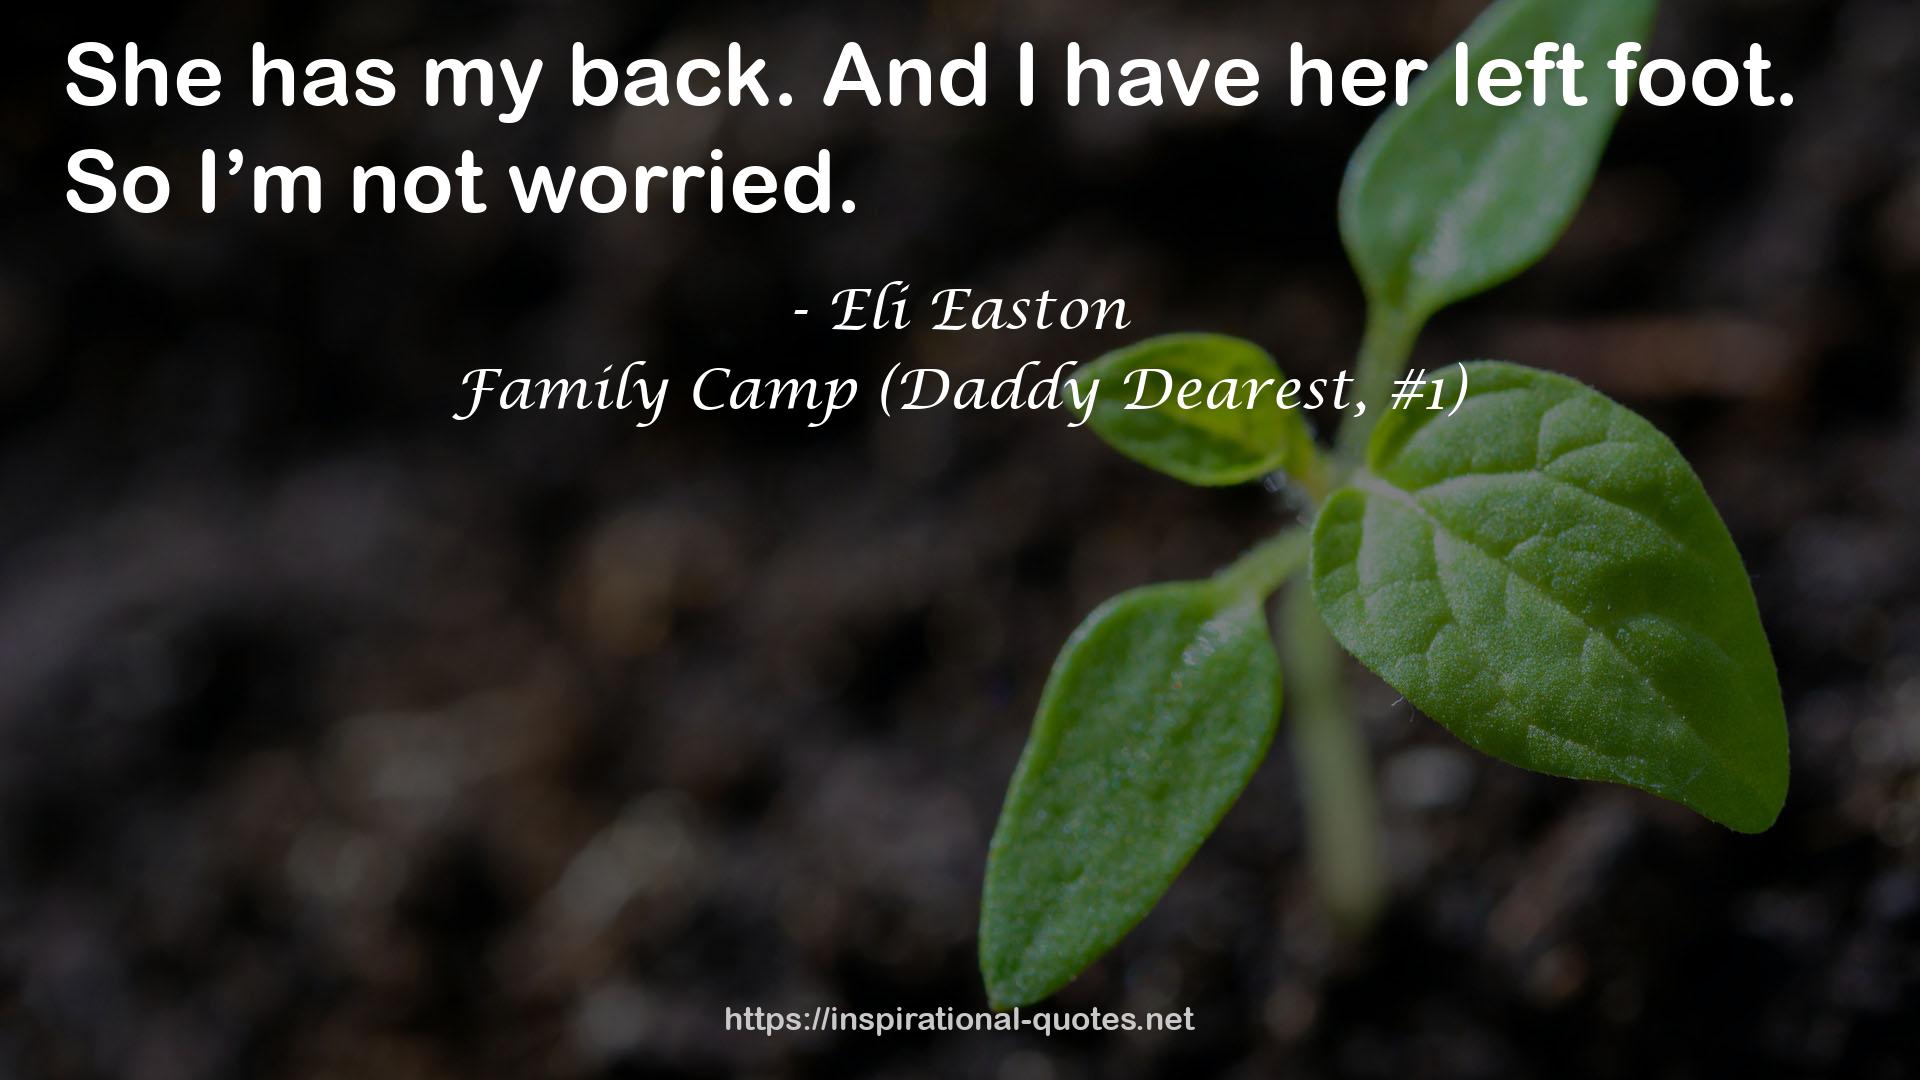 Family Camp (Daddy Dearest, #1) QUOTES